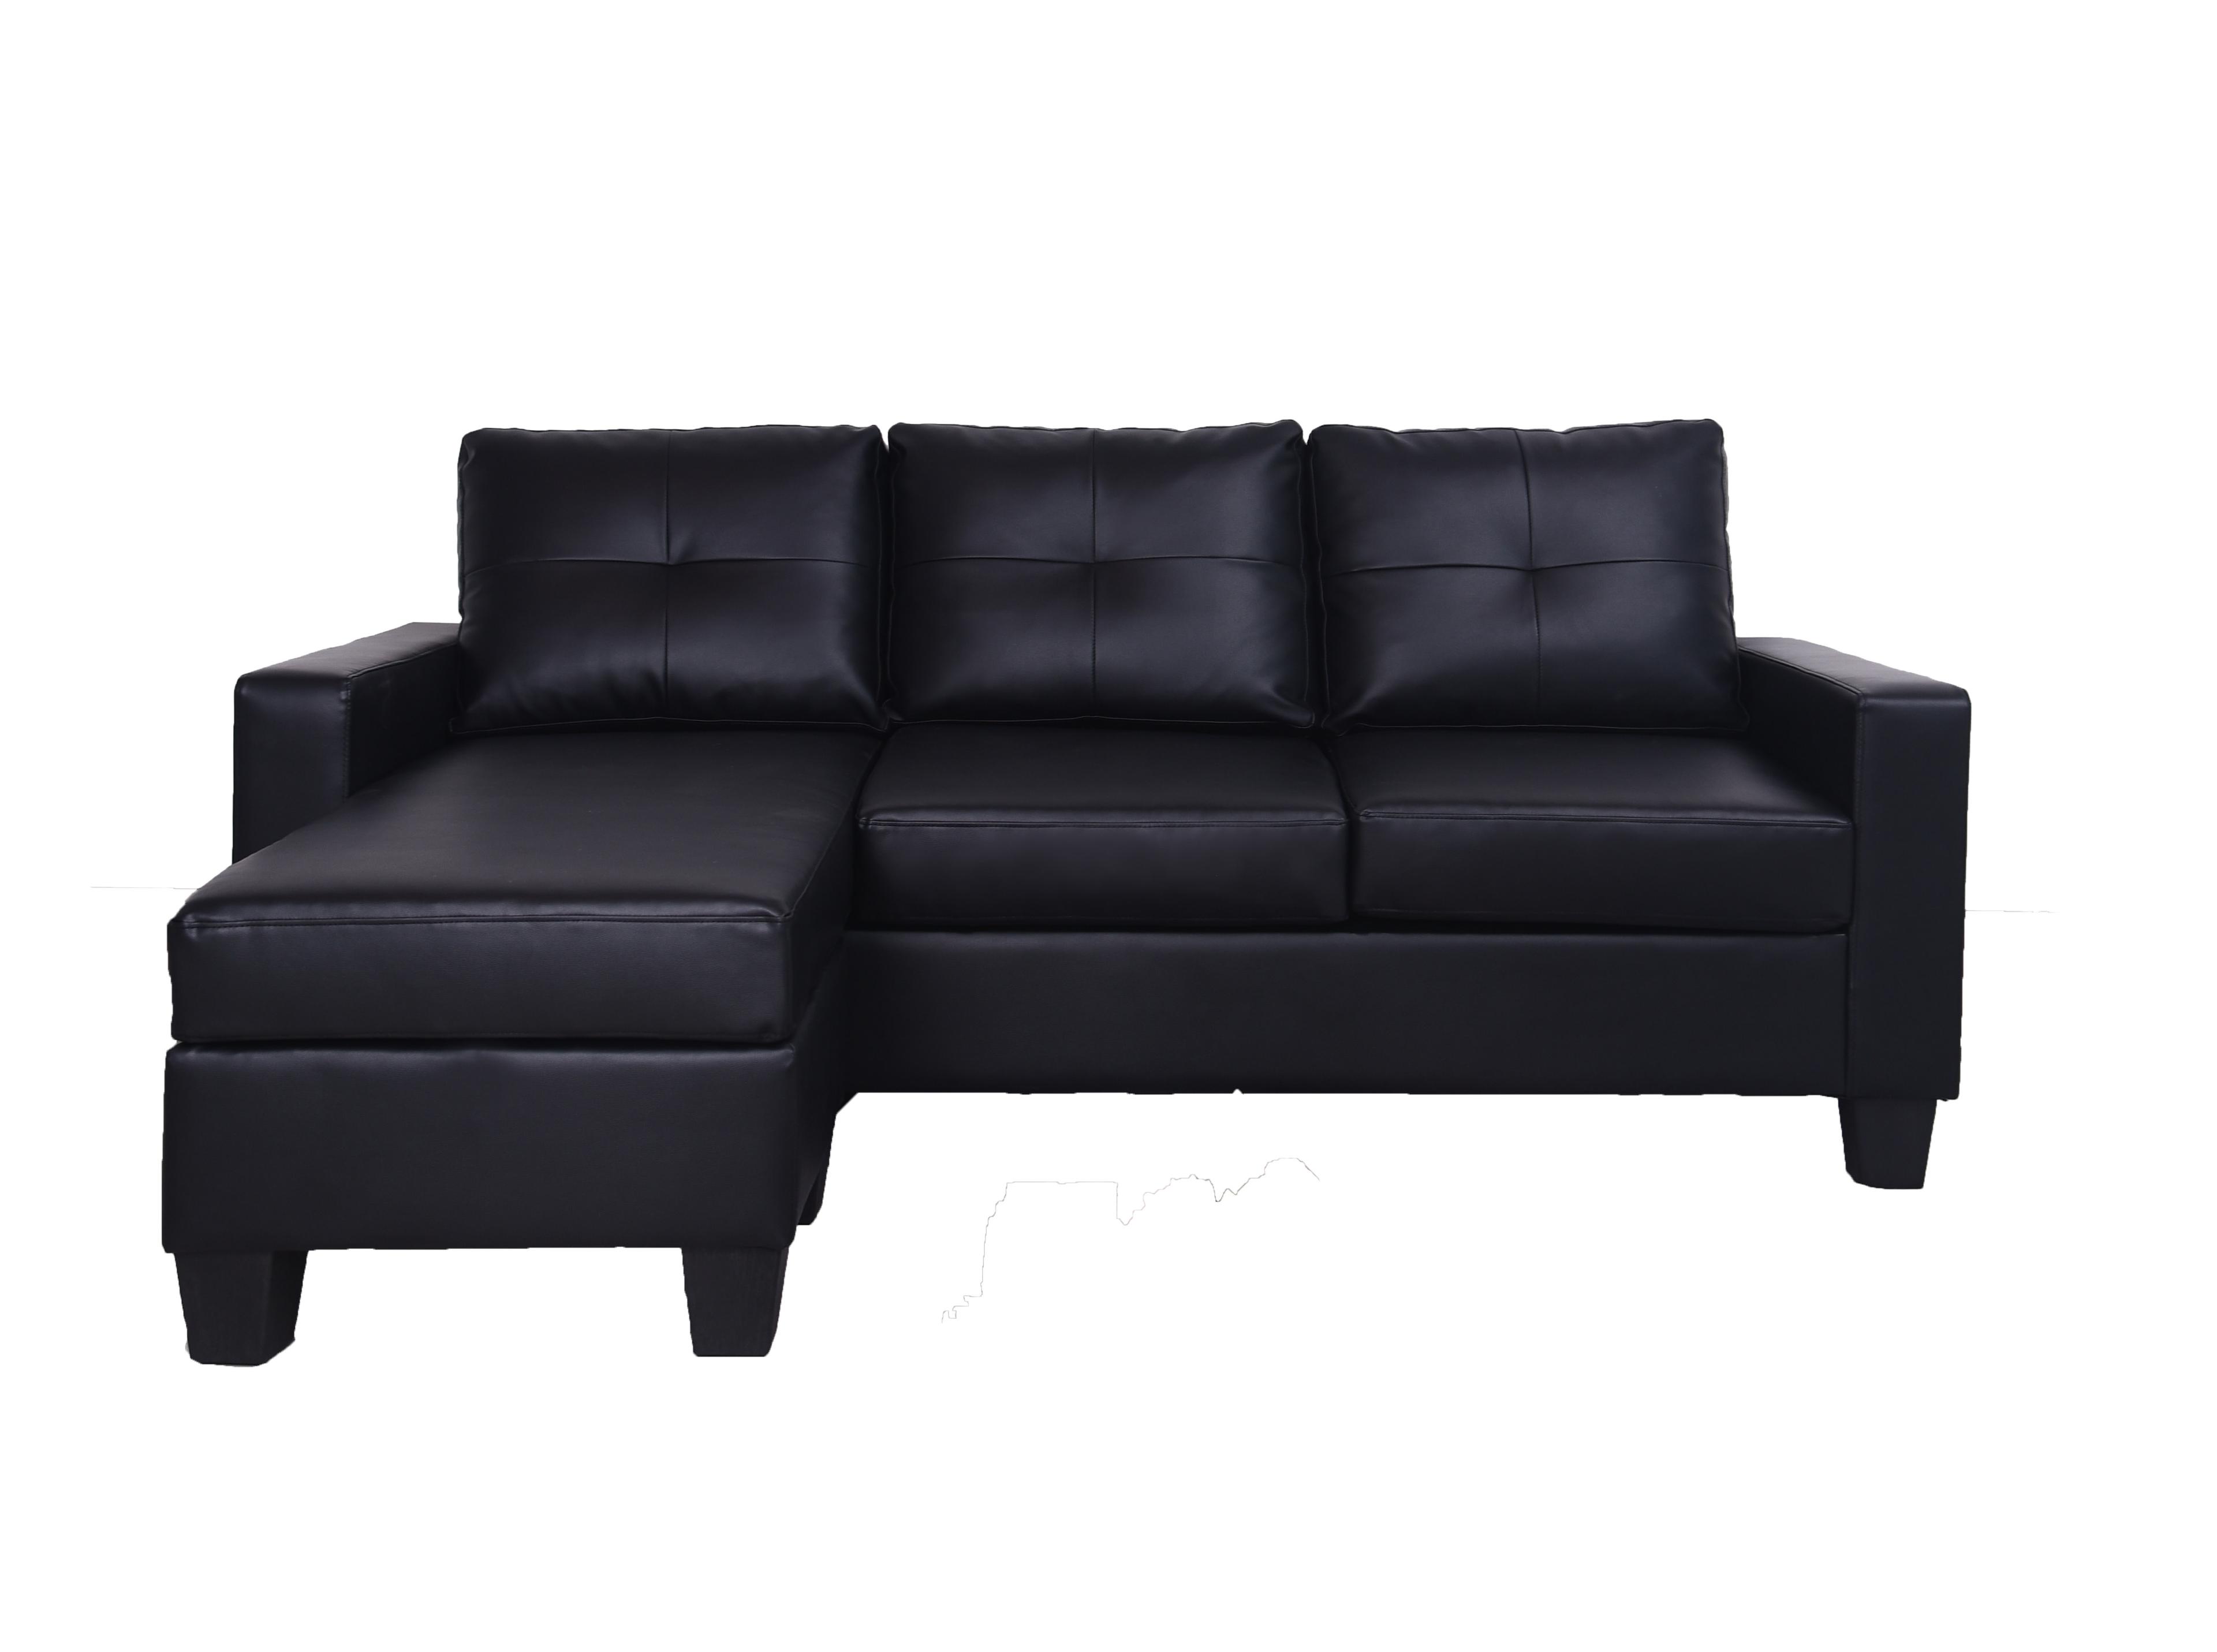 Max Black 2-piece Sectional with Chaise